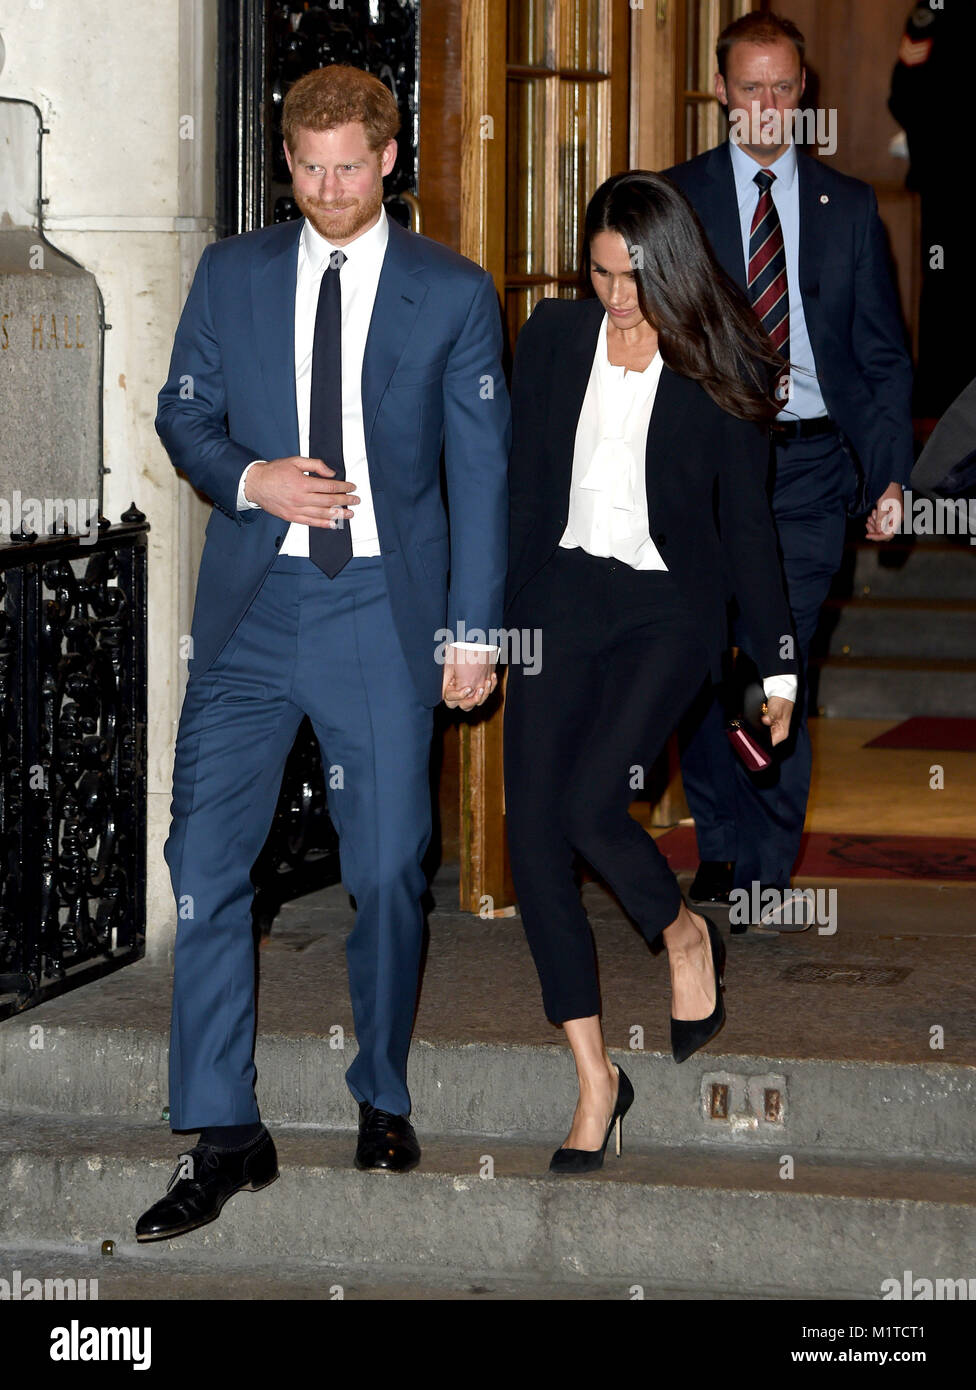 Photo Must Be Credited ©Alpha Press 079965 01/02/2018 Prince Harry and Meghan Markle at Endeavour Fund Awards Ceremony held at Goldsmiths Hall in London Stock Photo